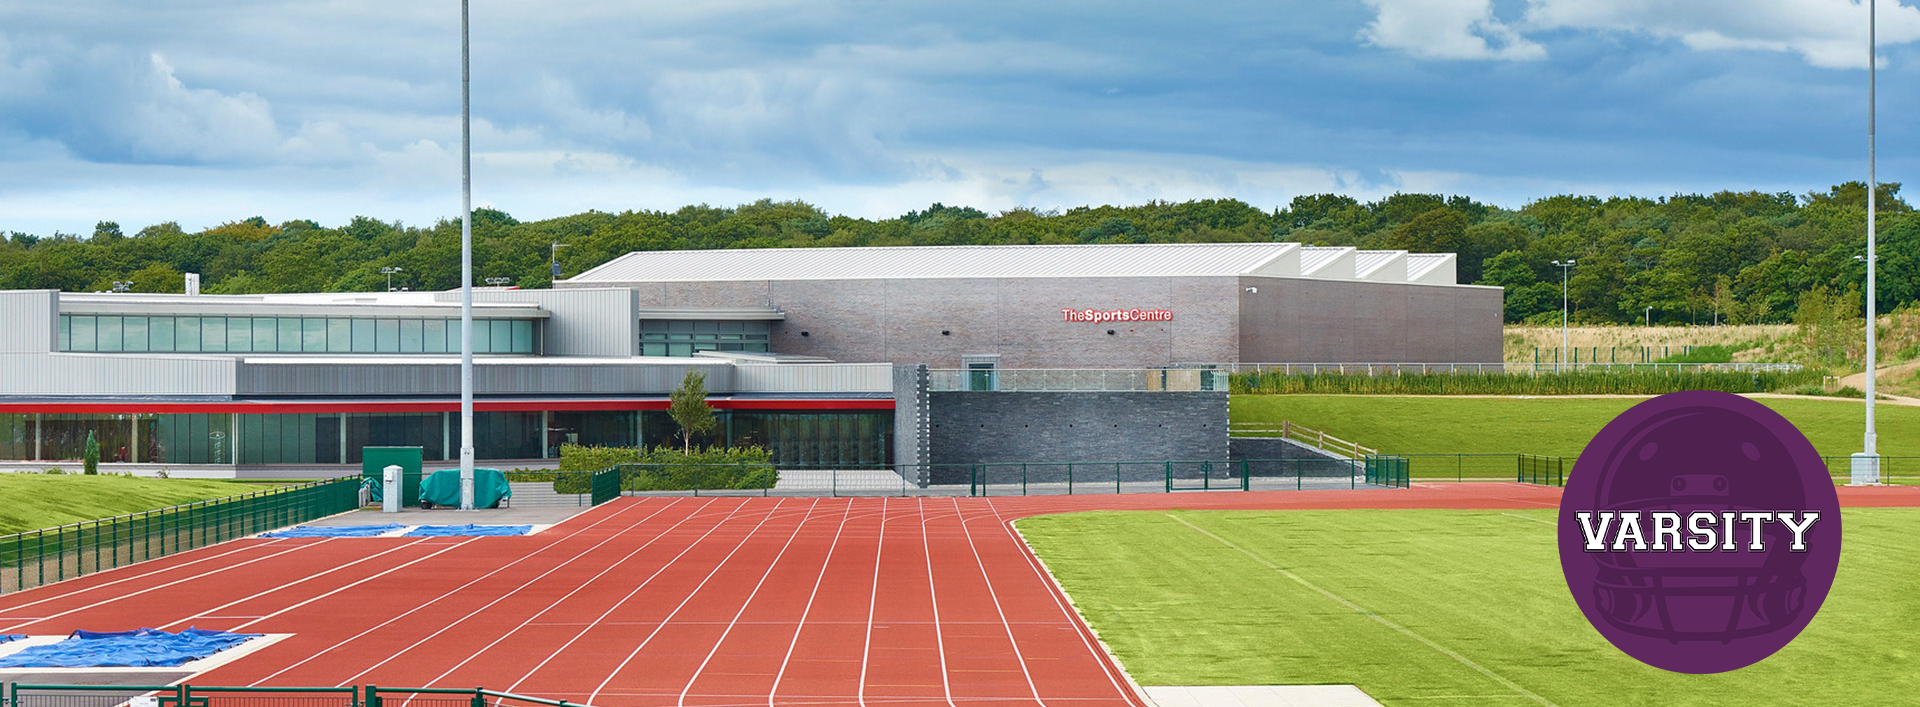 exterior shot of the sports centre with purple circle on the bottom right hand corner saying Varsity